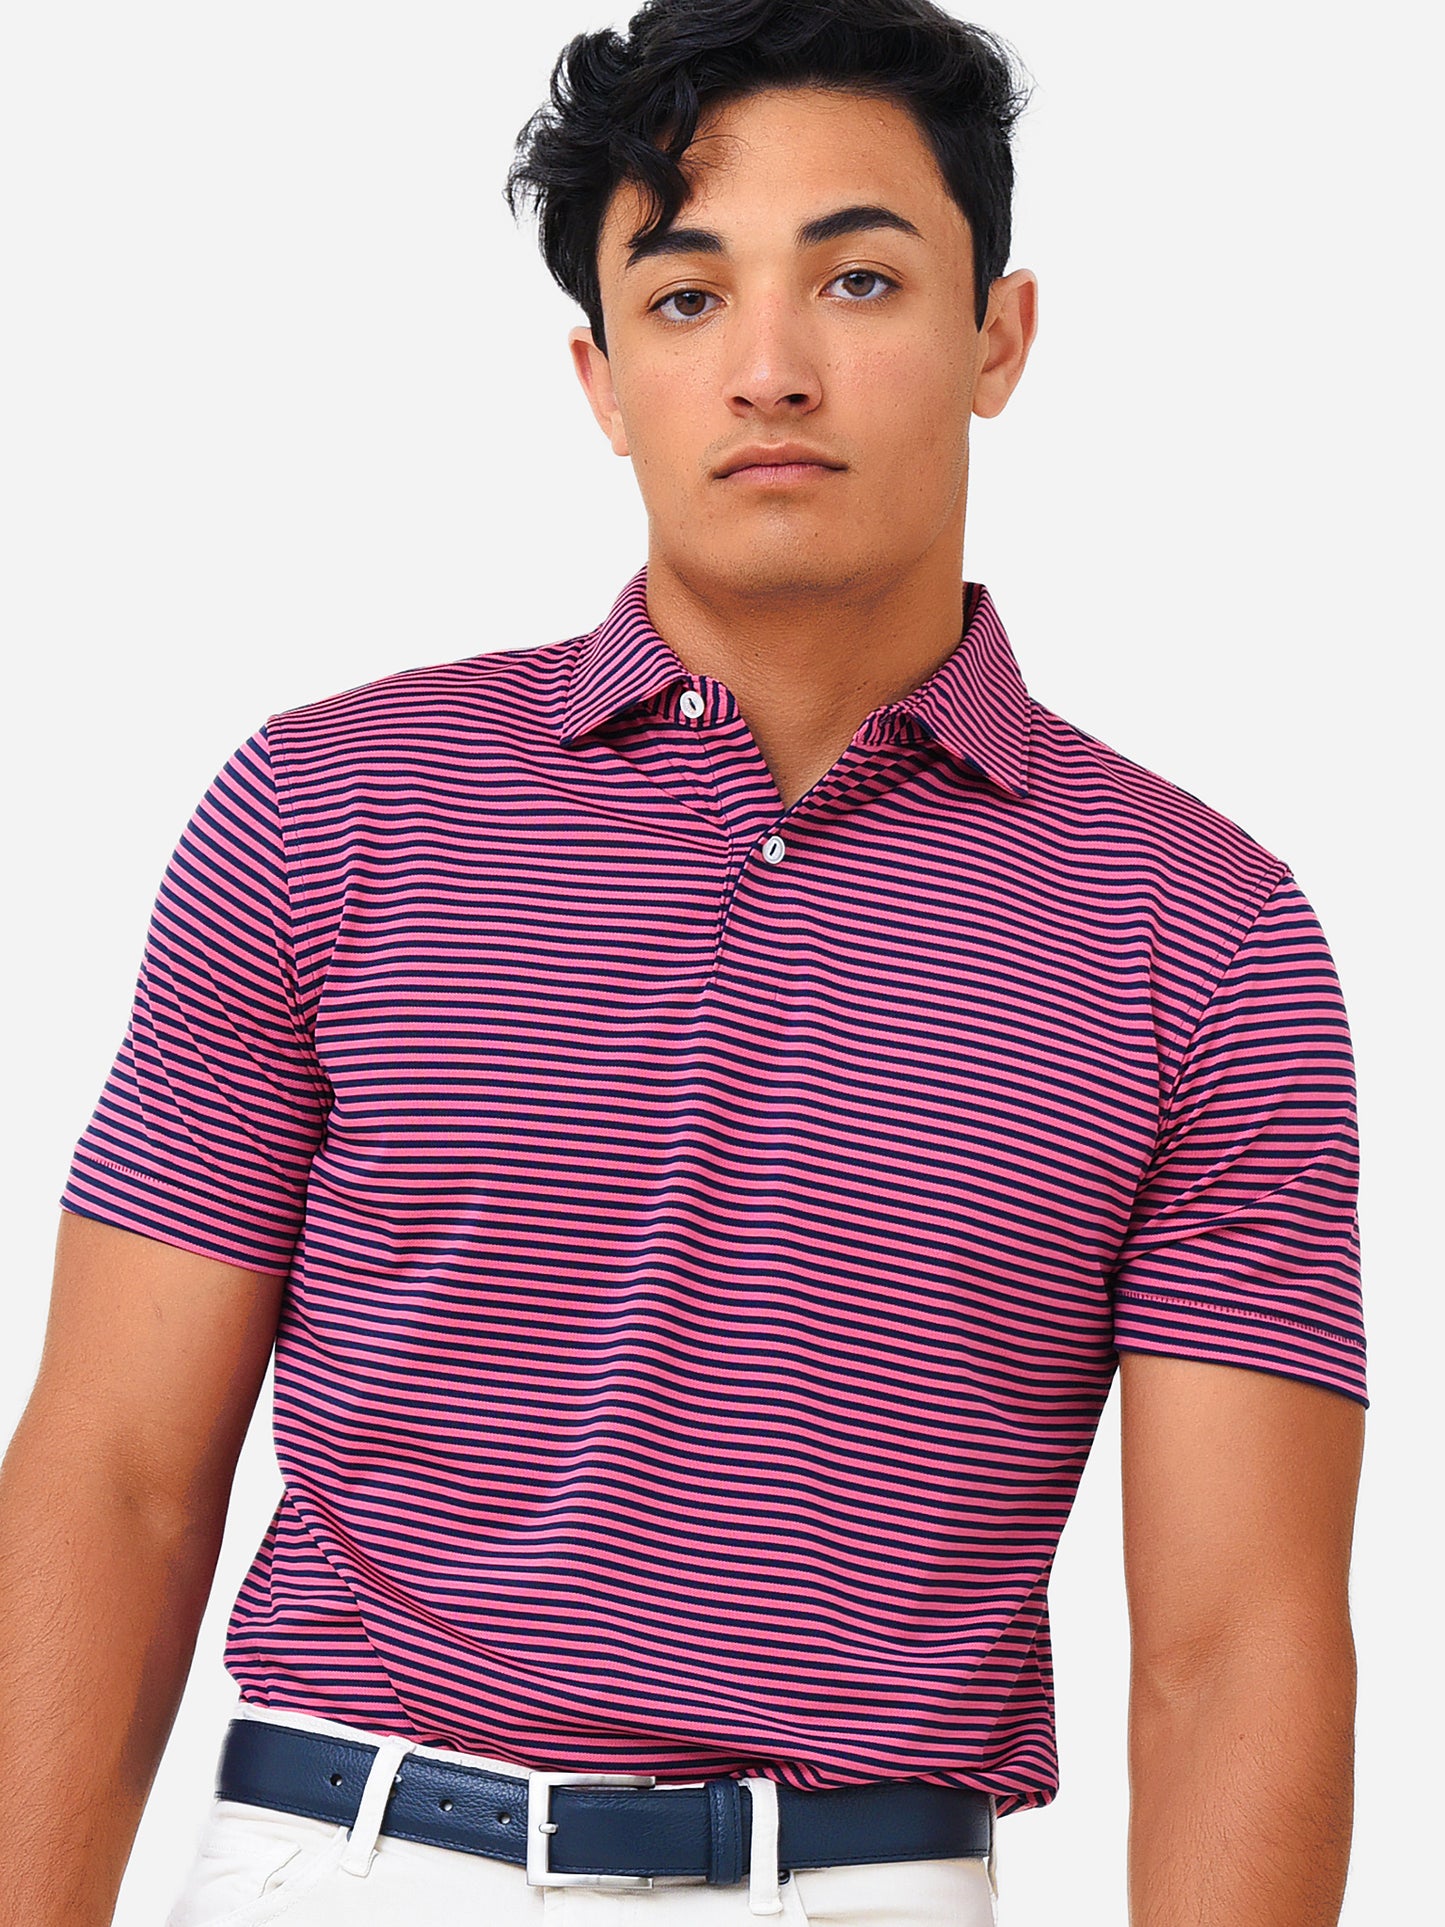 Peter Millar Crown Crafted Men's Mood Performance Mesh Polo